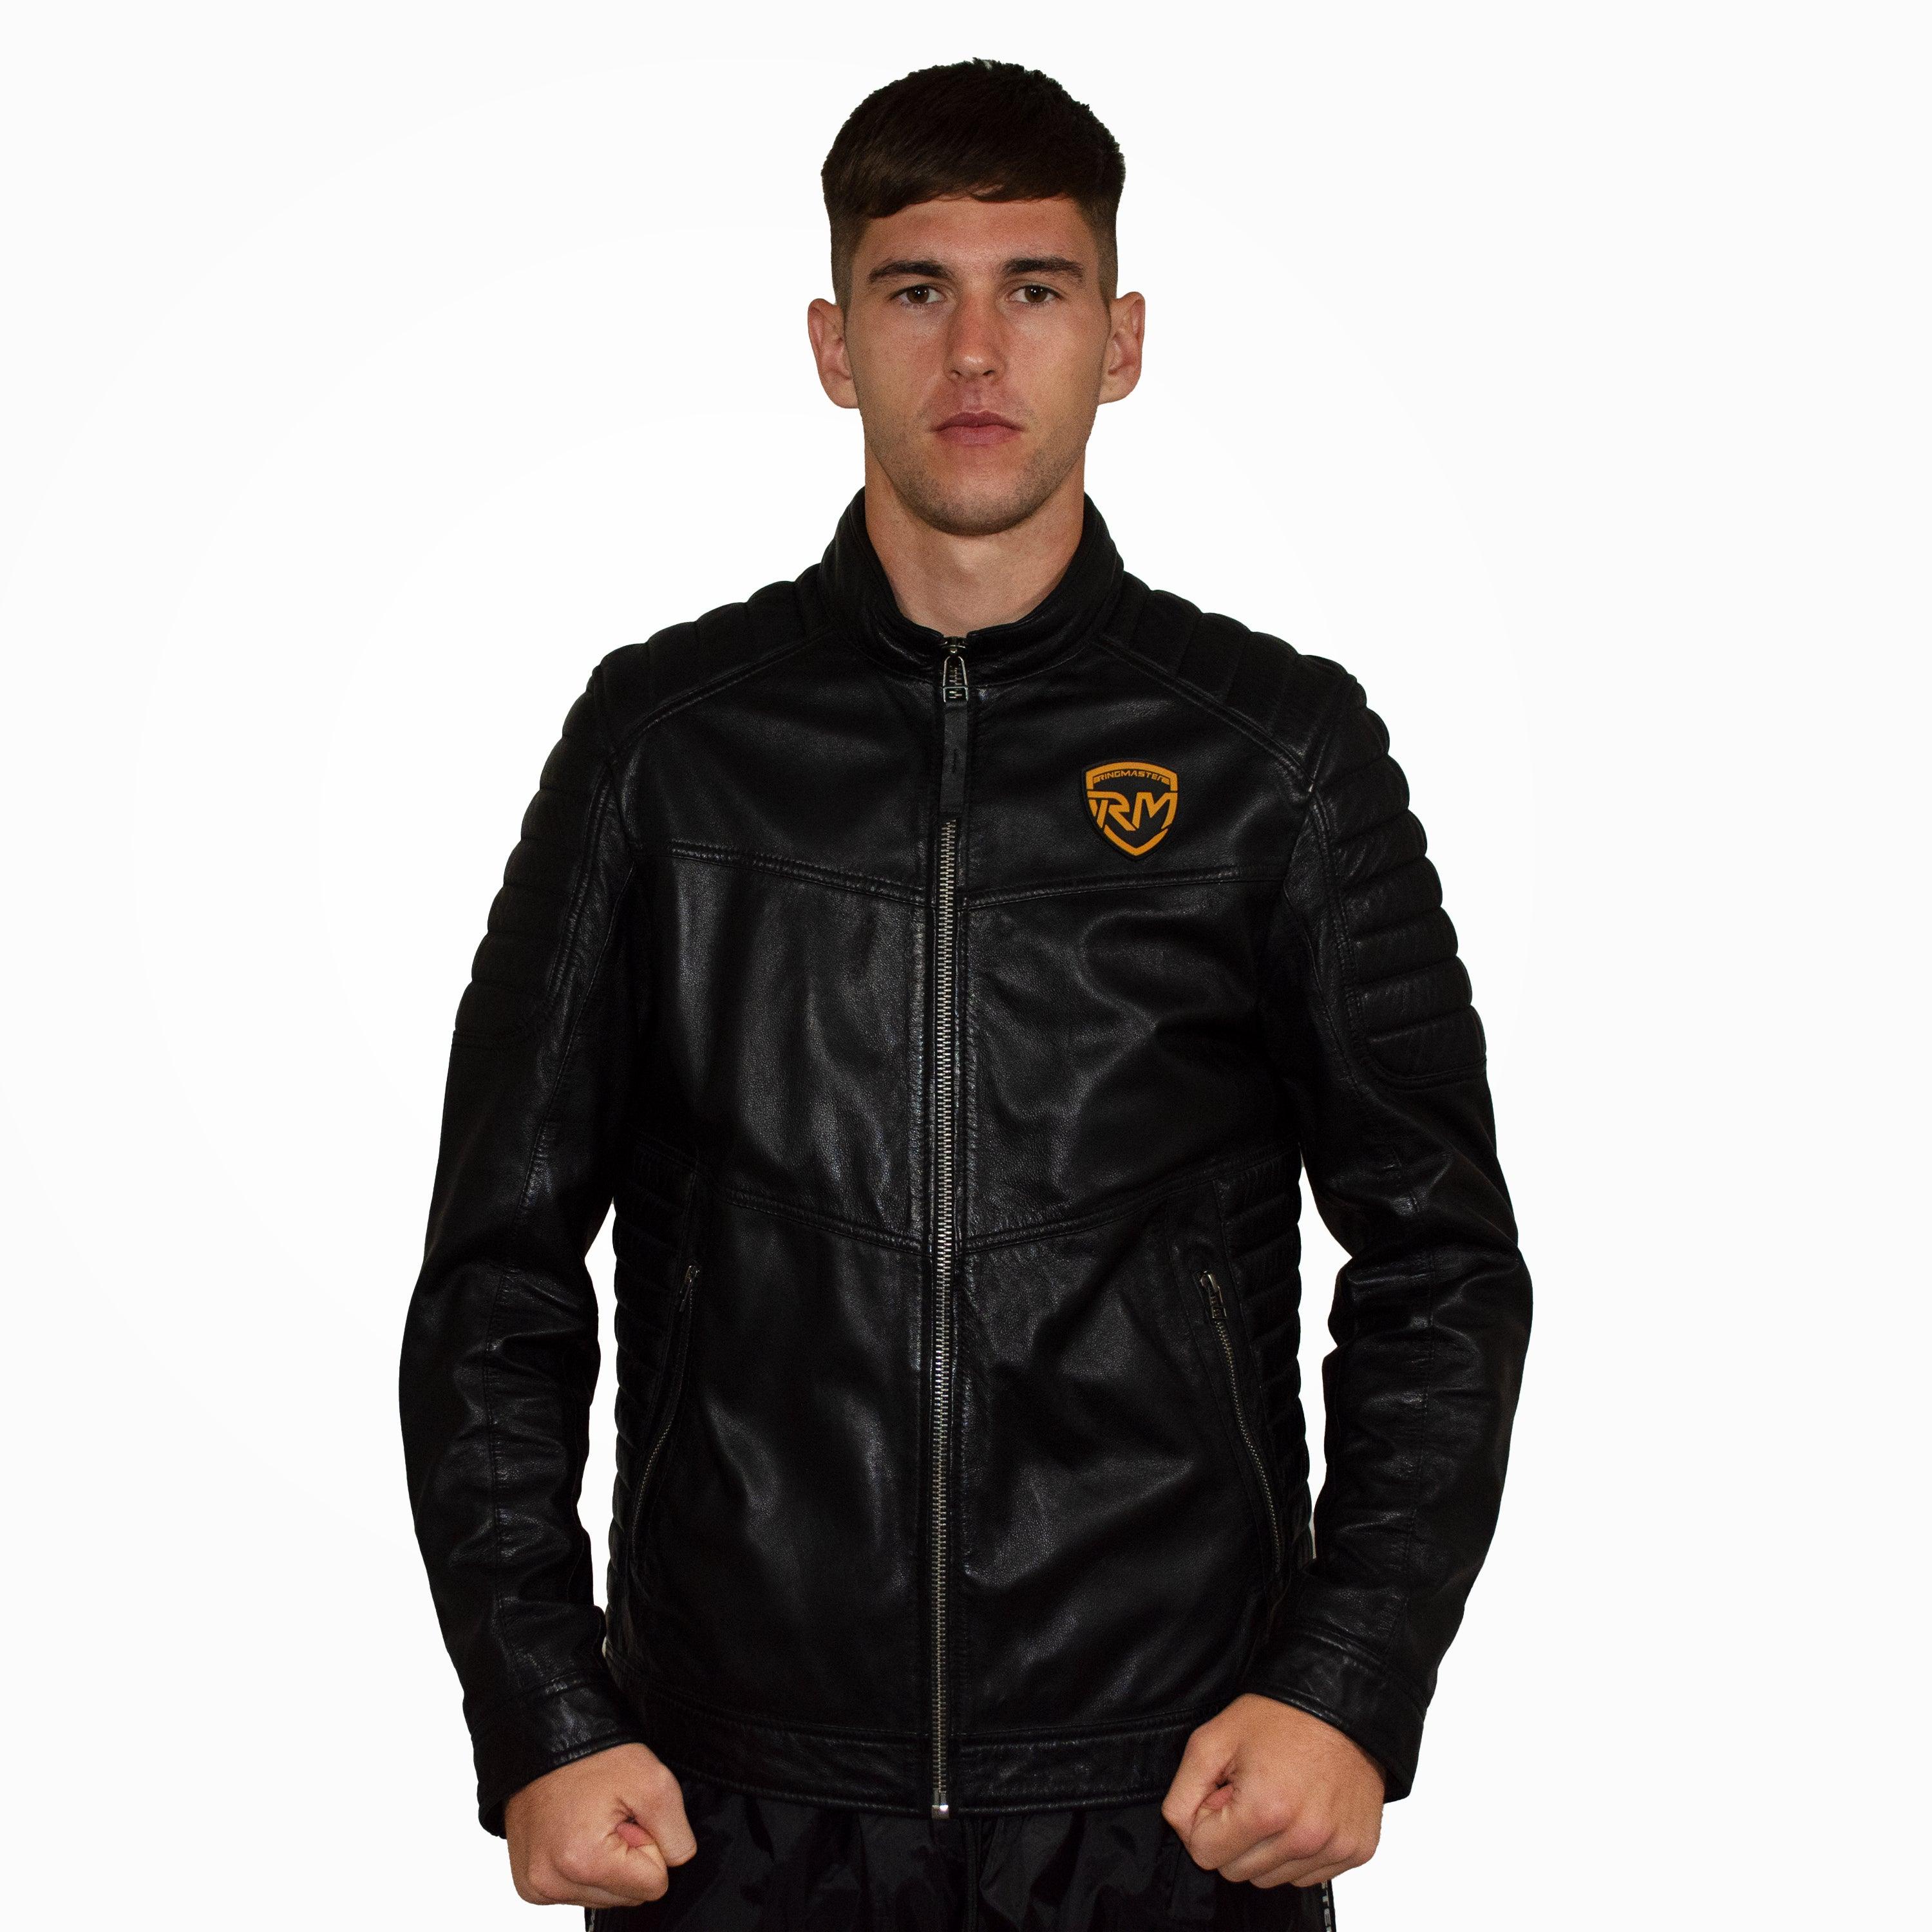 RingMaster Sports Genuine Leather Jacket L.G.N.D series Black - RINGMASTER SPORTS - Made For Champions